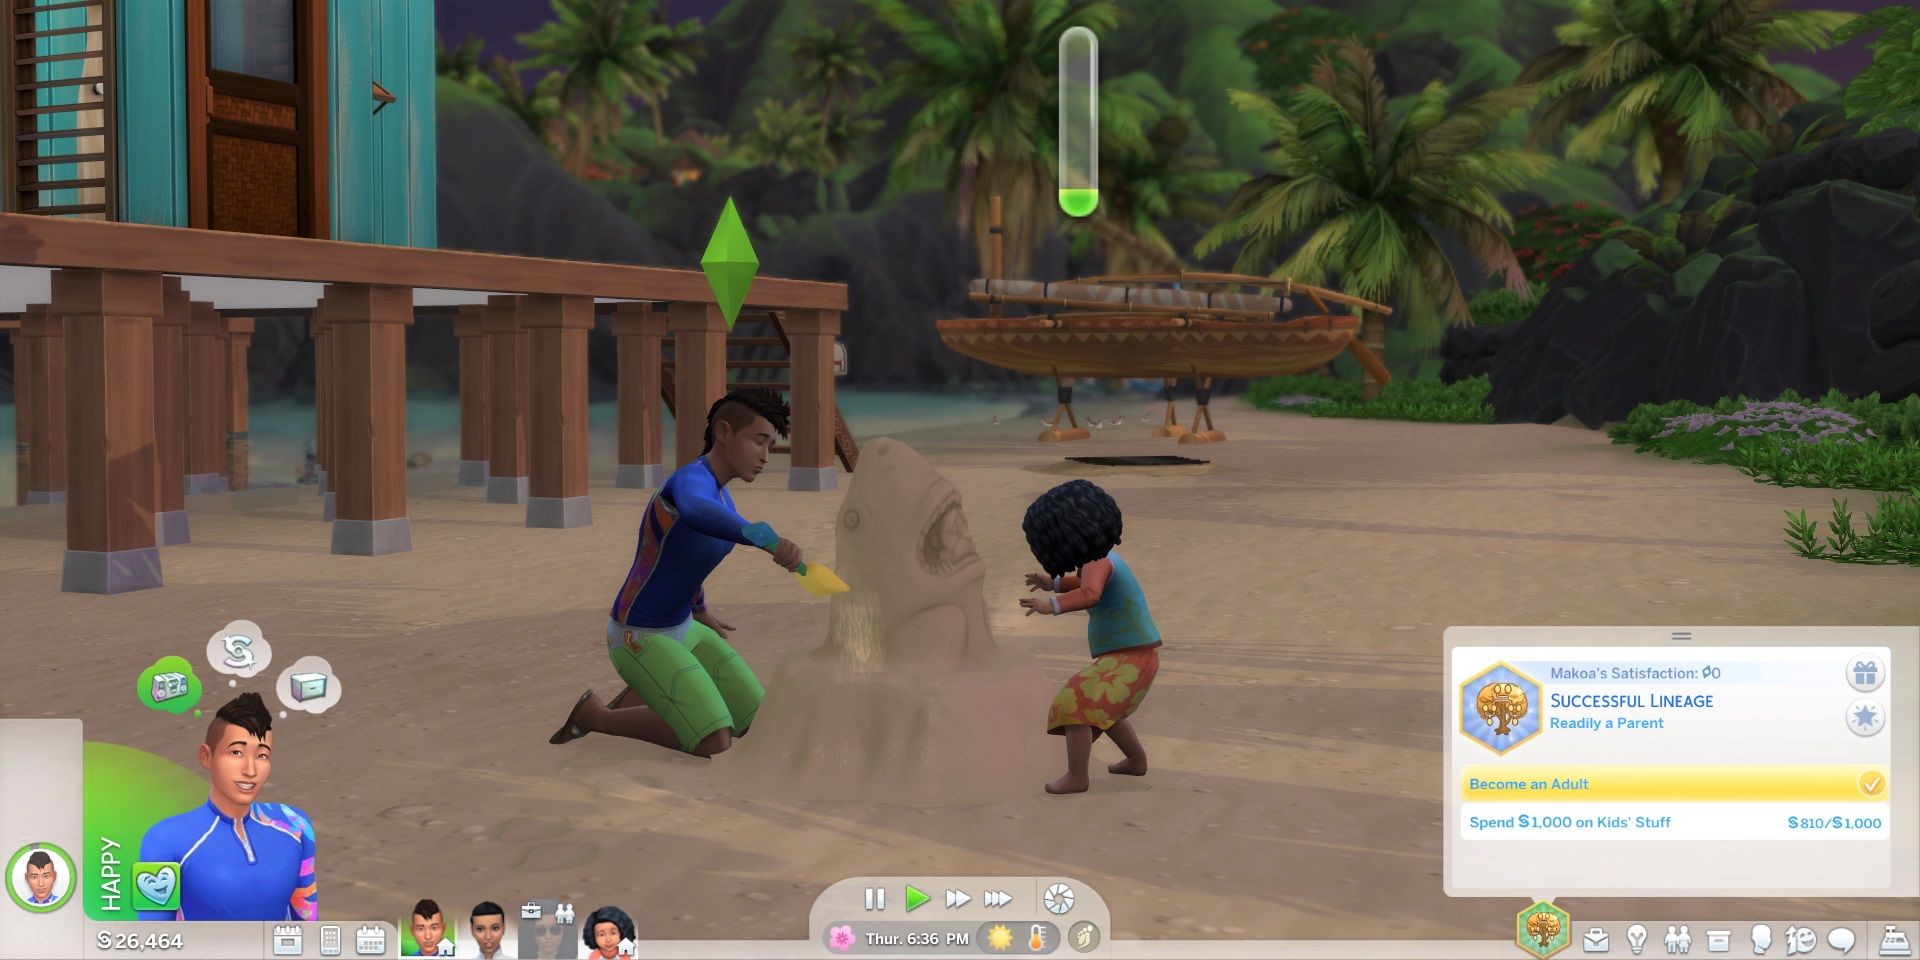 The Kealoha family plays in the sand in Sulani.